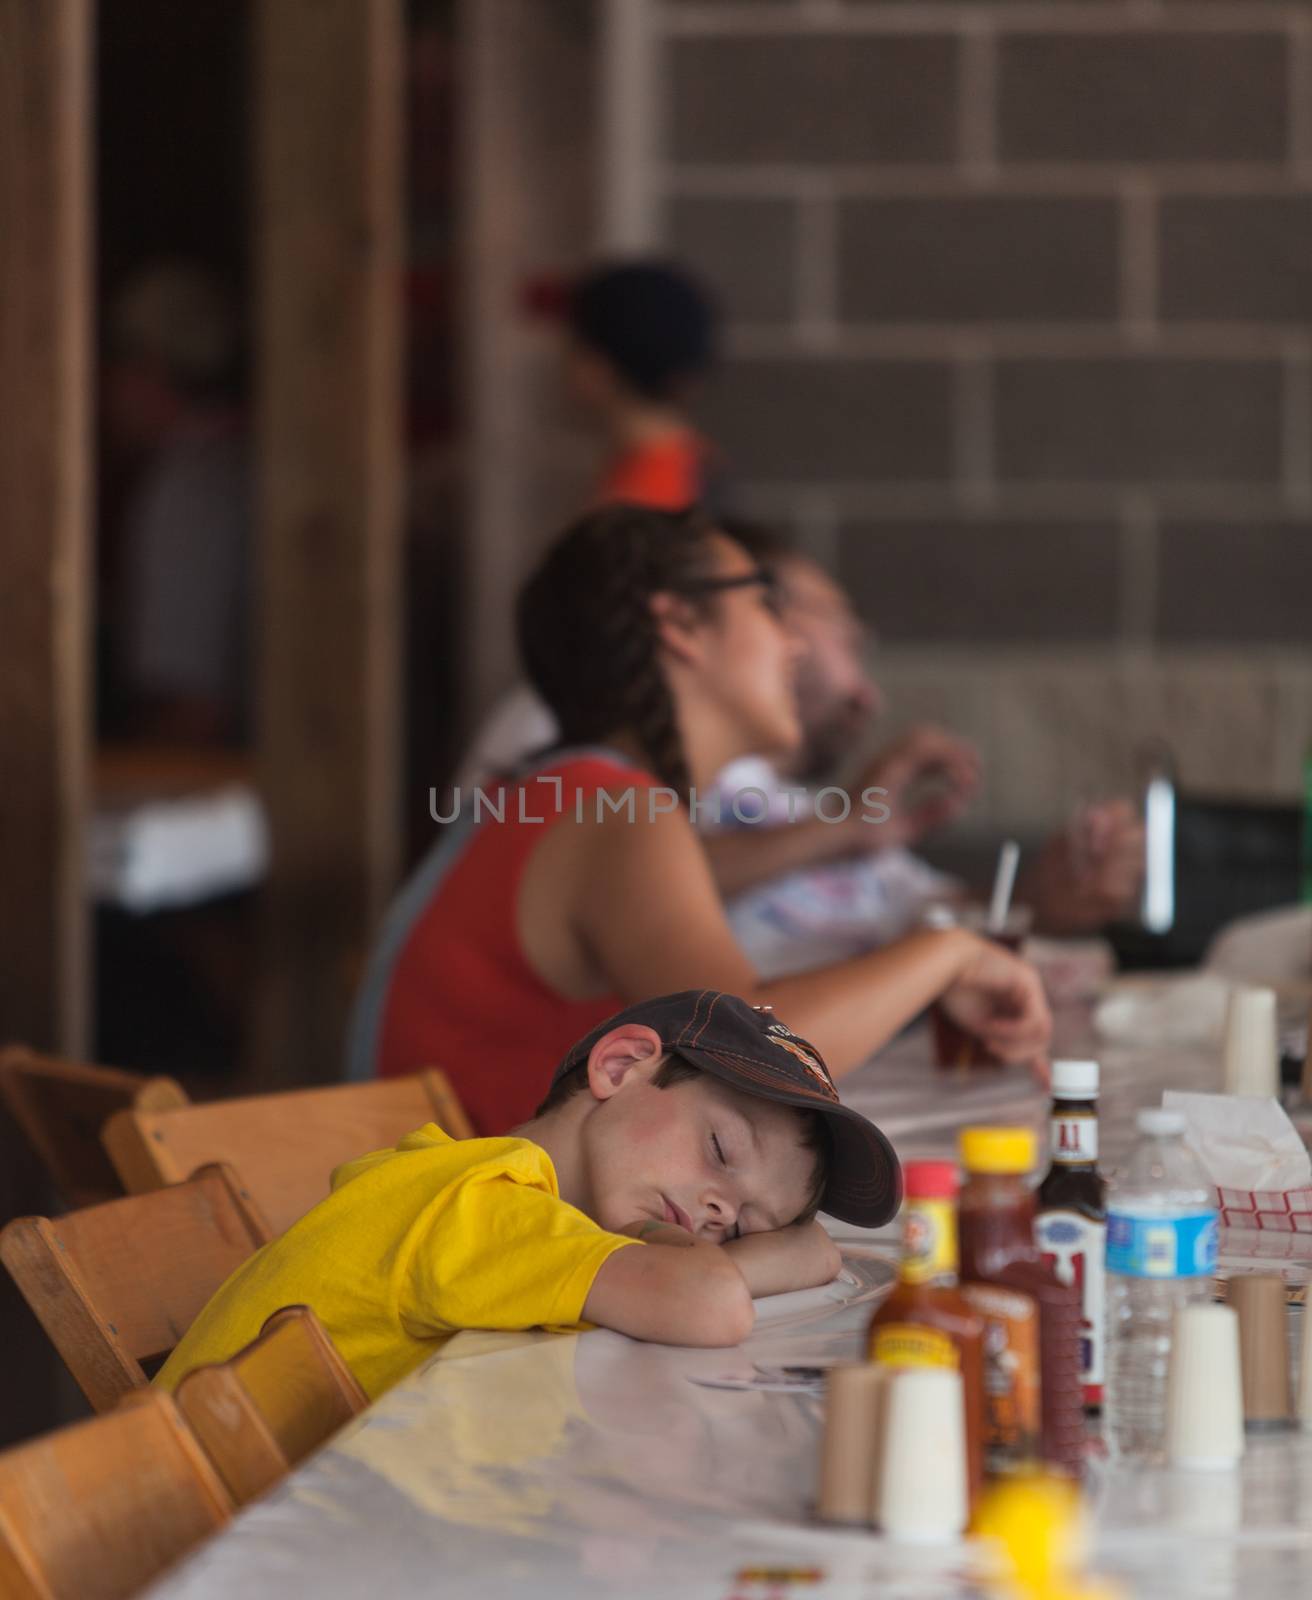 DES MOINES, IA /USA - AUGUST 10: Unidentified tired boy rests head on table at the Iowa State Fair on August 10, 2014 in Des Moines, Iowa, USA.